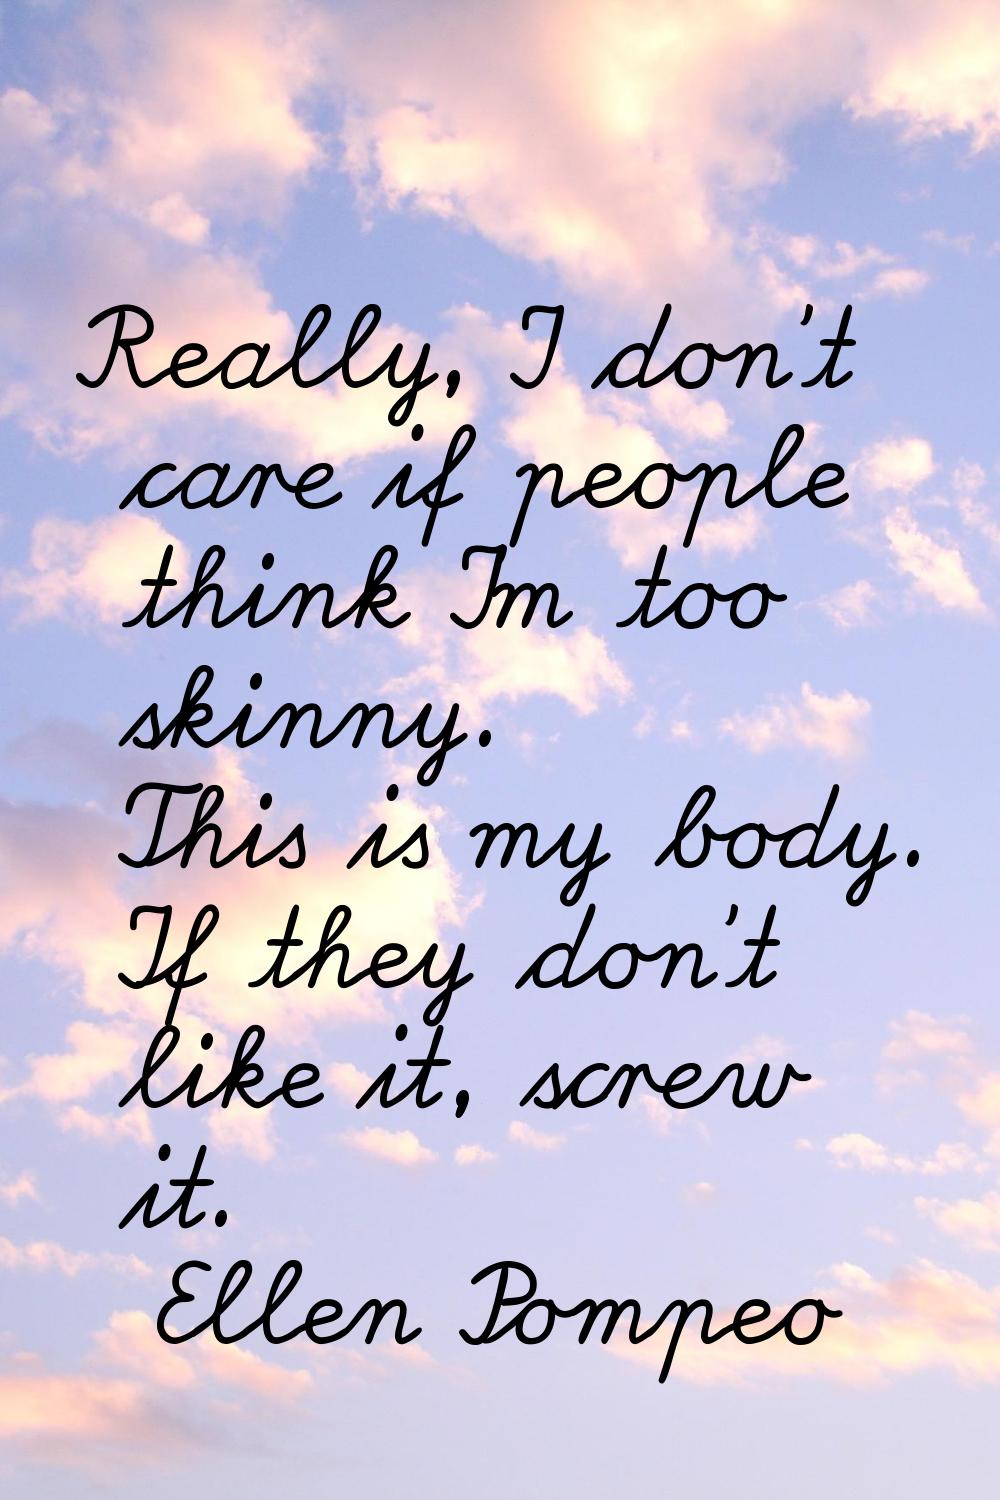 Really, I don't care if people think I'm too skinny. This is my body. If they don't like it, screw 